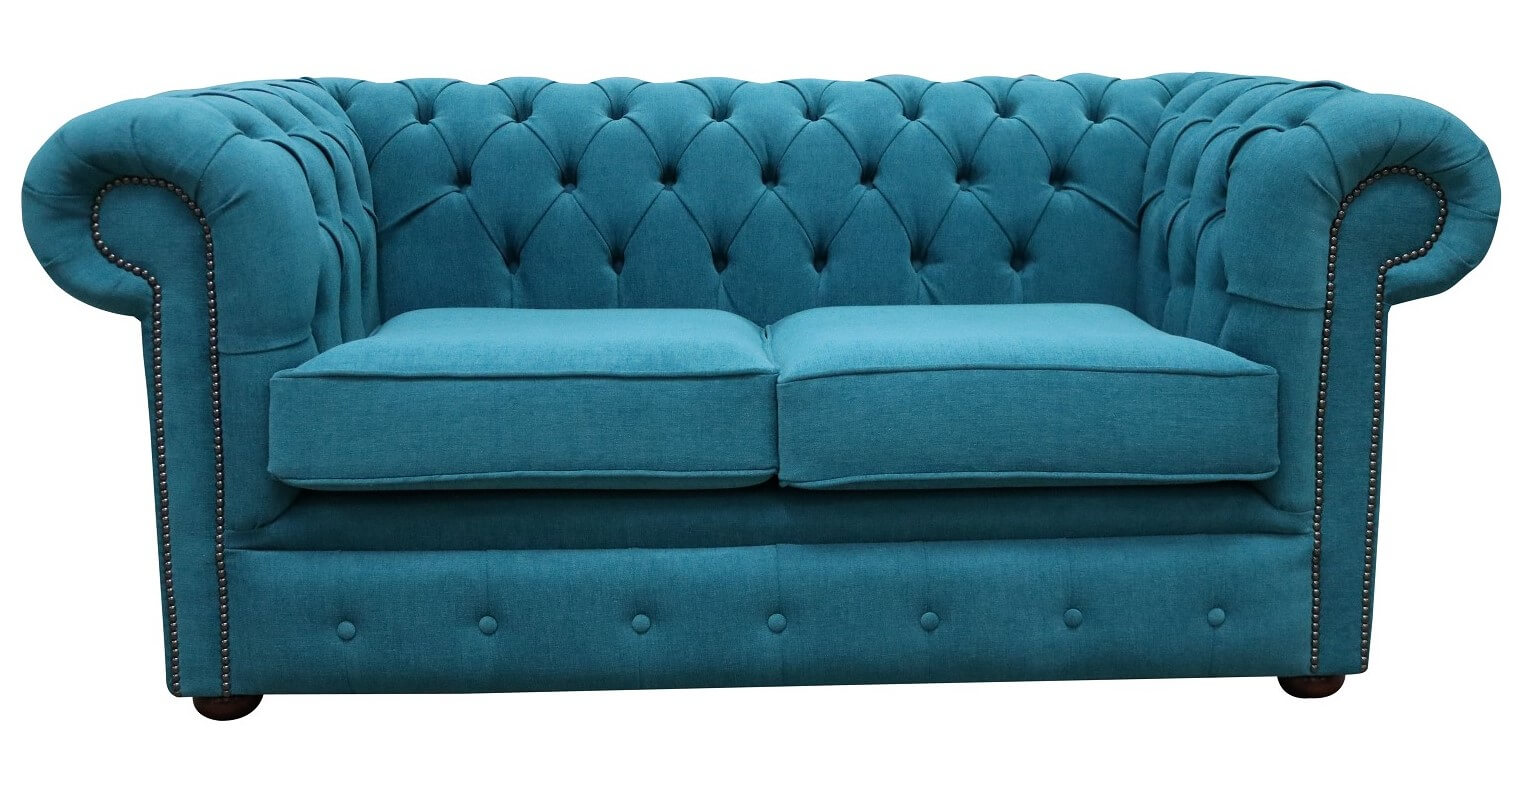 Style North of the Border Discover Chesterfield Sofas in Canada  %Post Title